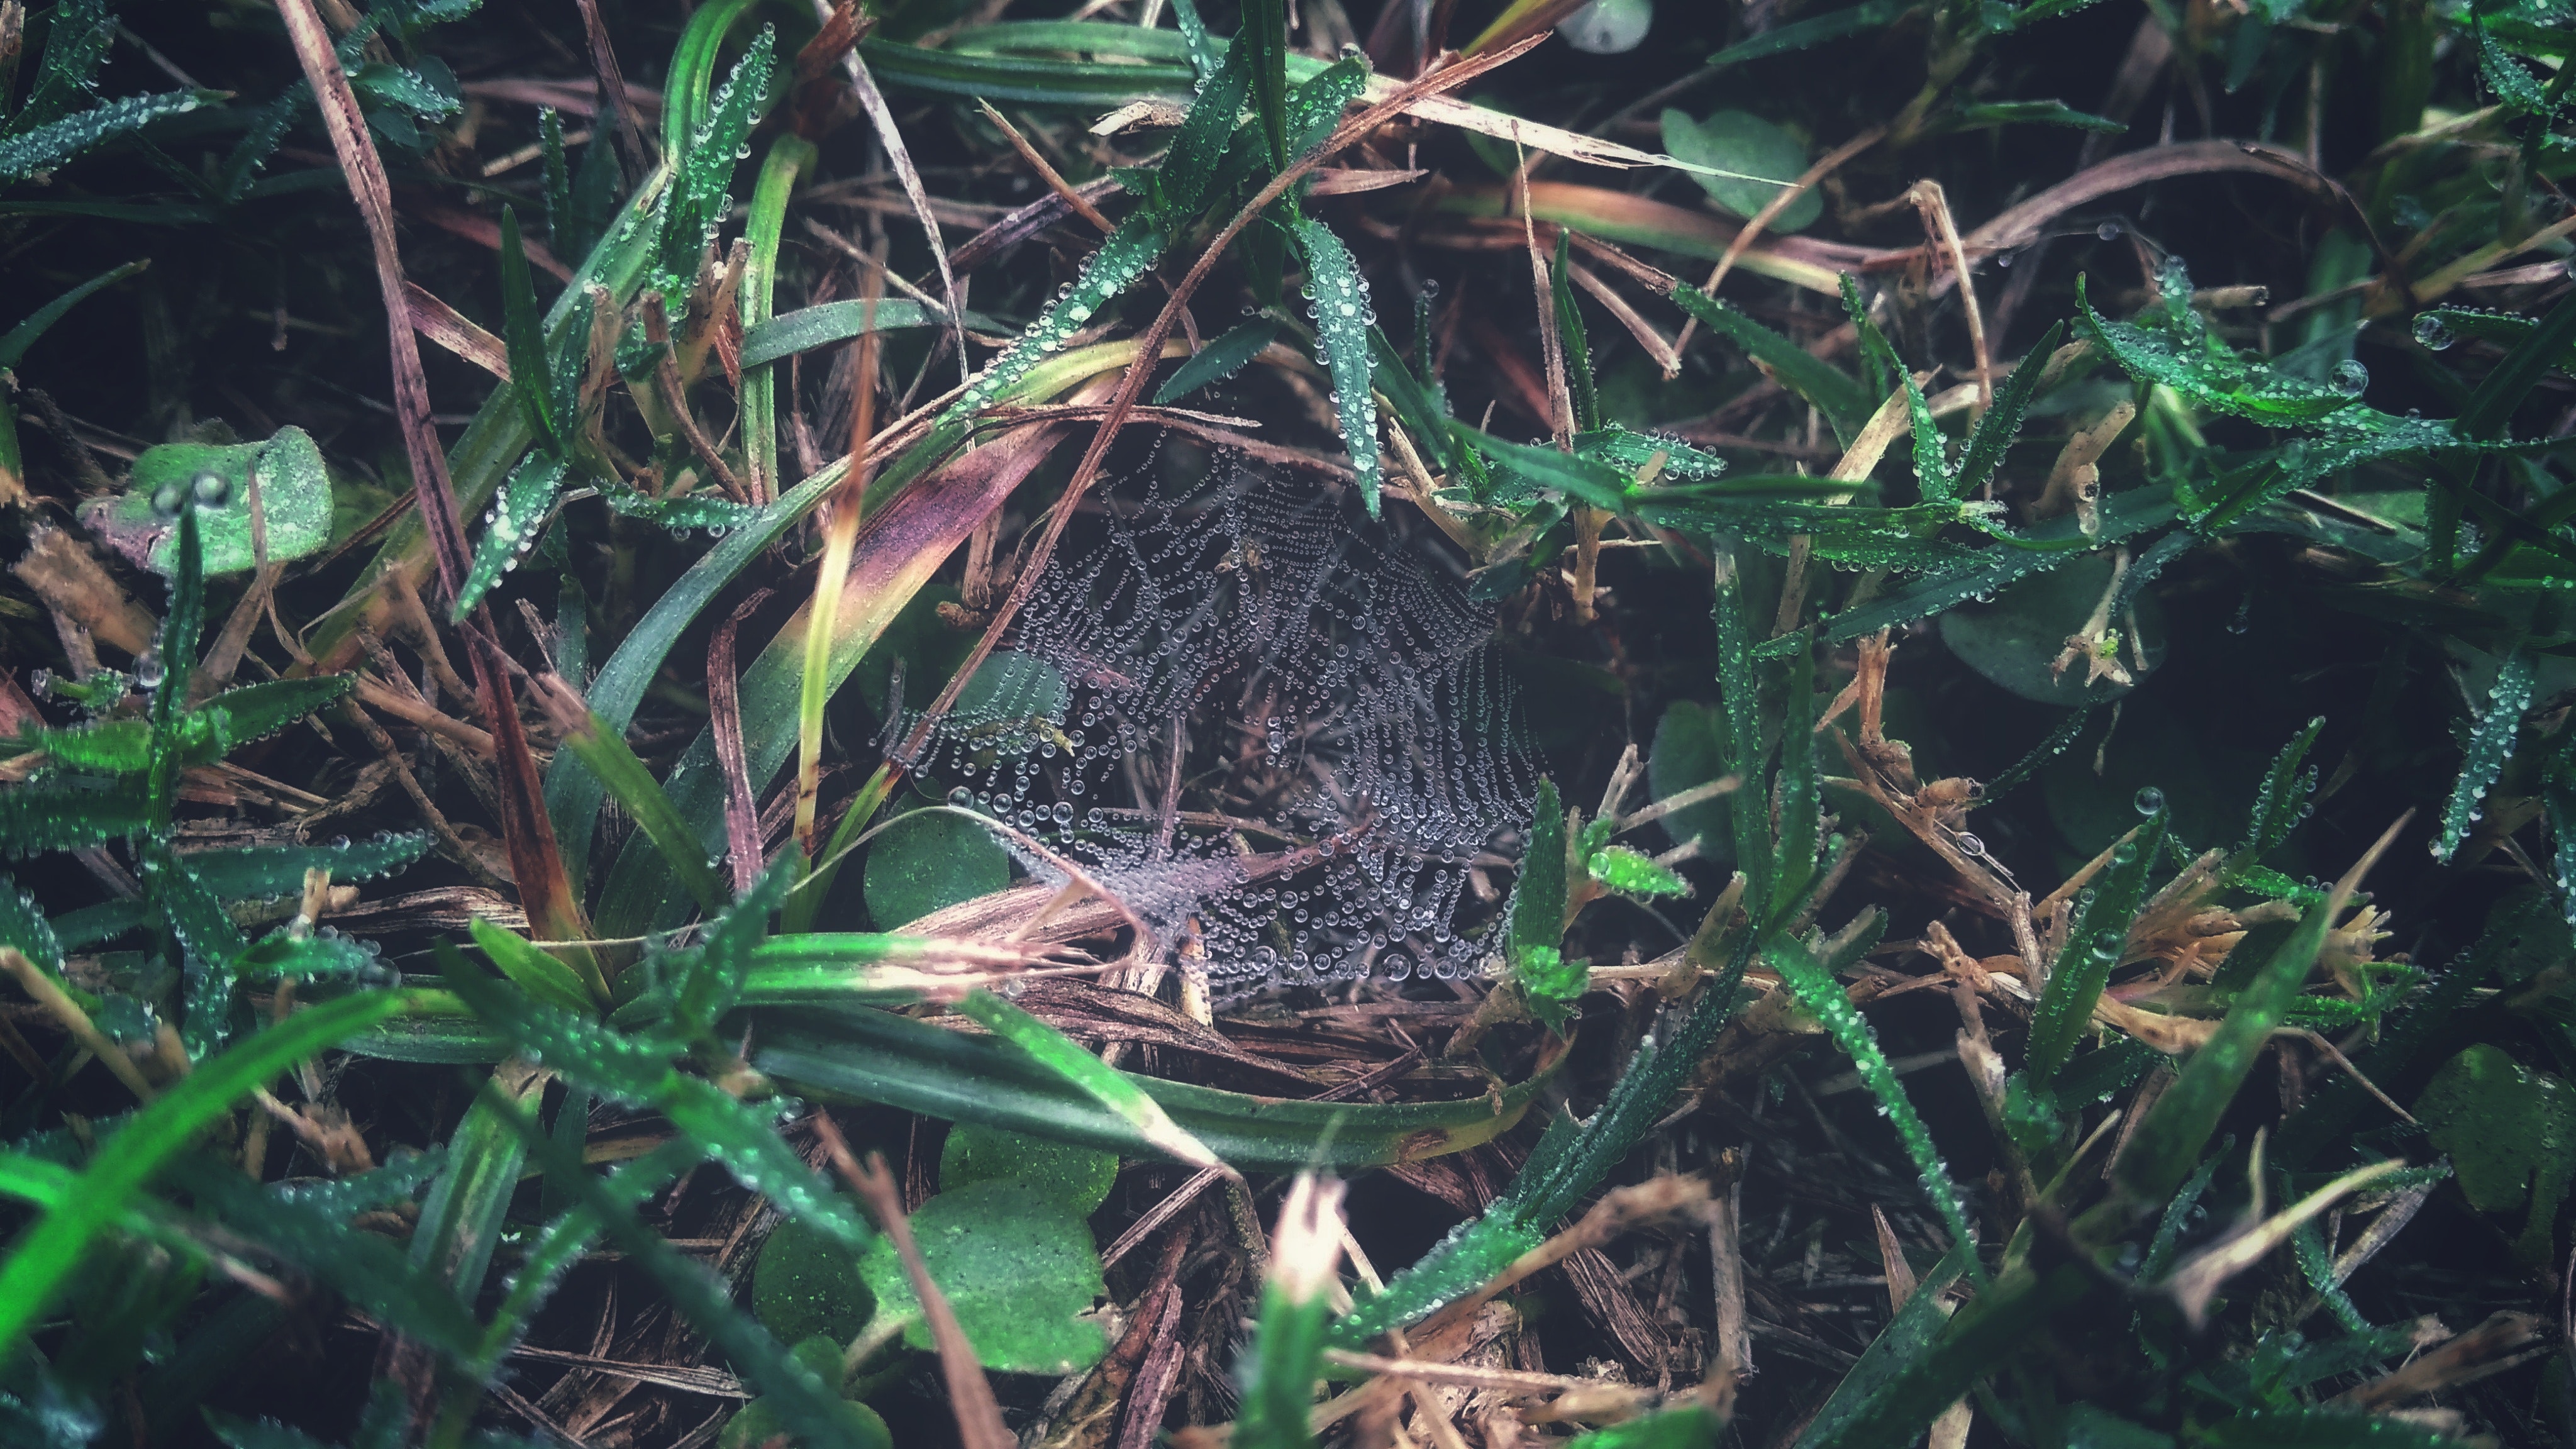 Spider Web on Grass With Dew Closeup Photography, Animal, Leaves, Wild, Wet, HQ Photo